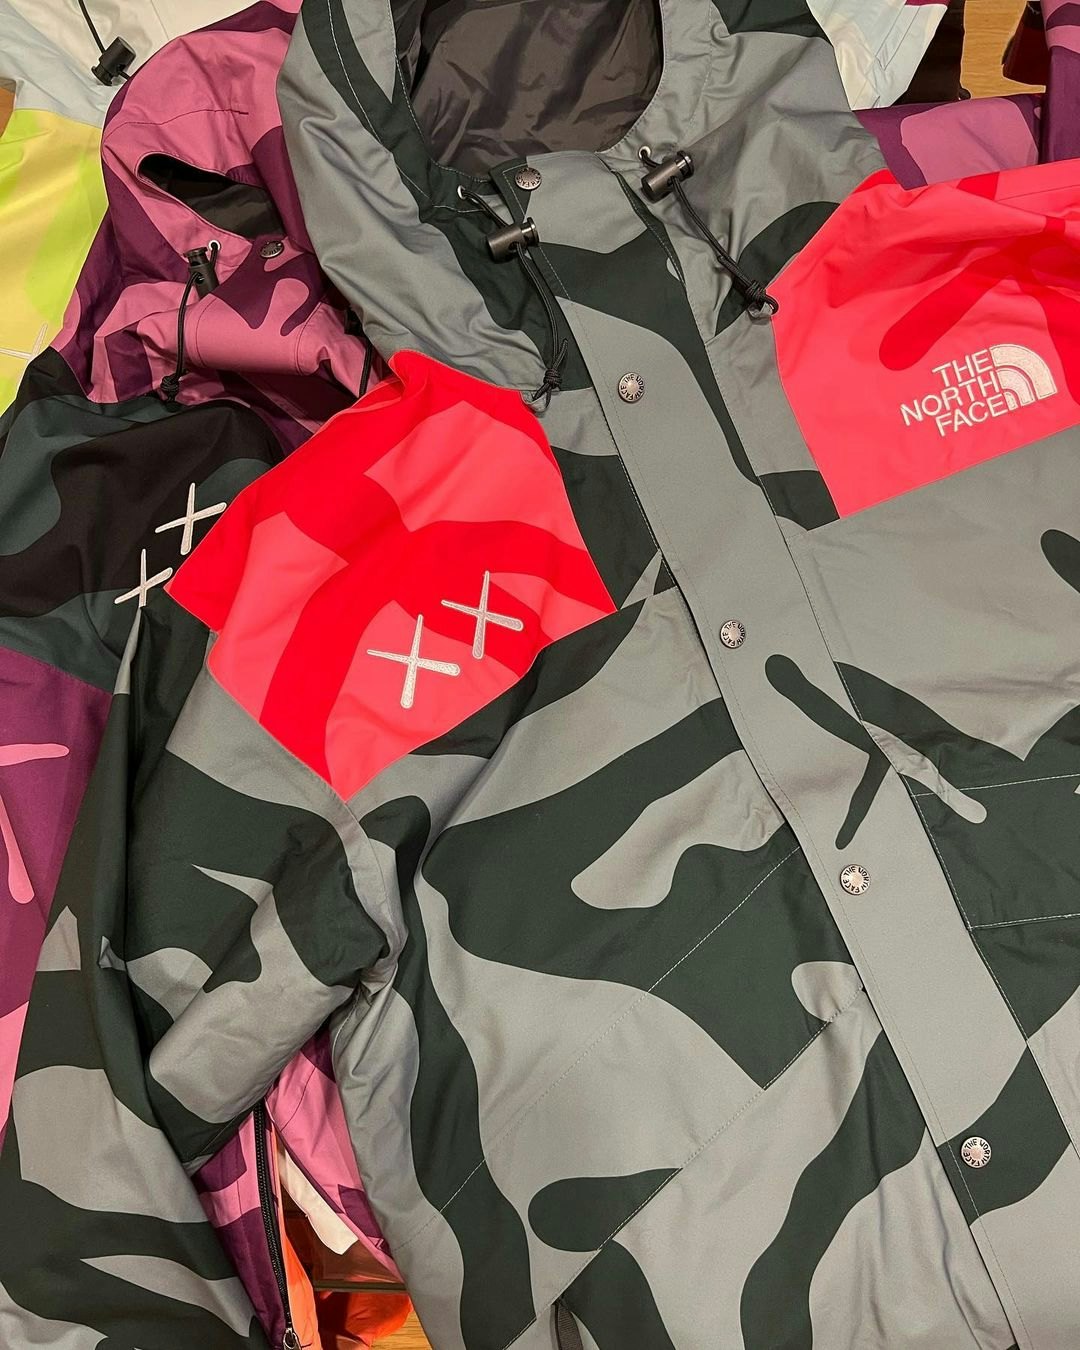 Kaws made the ugliest North Face jacket you may ever see